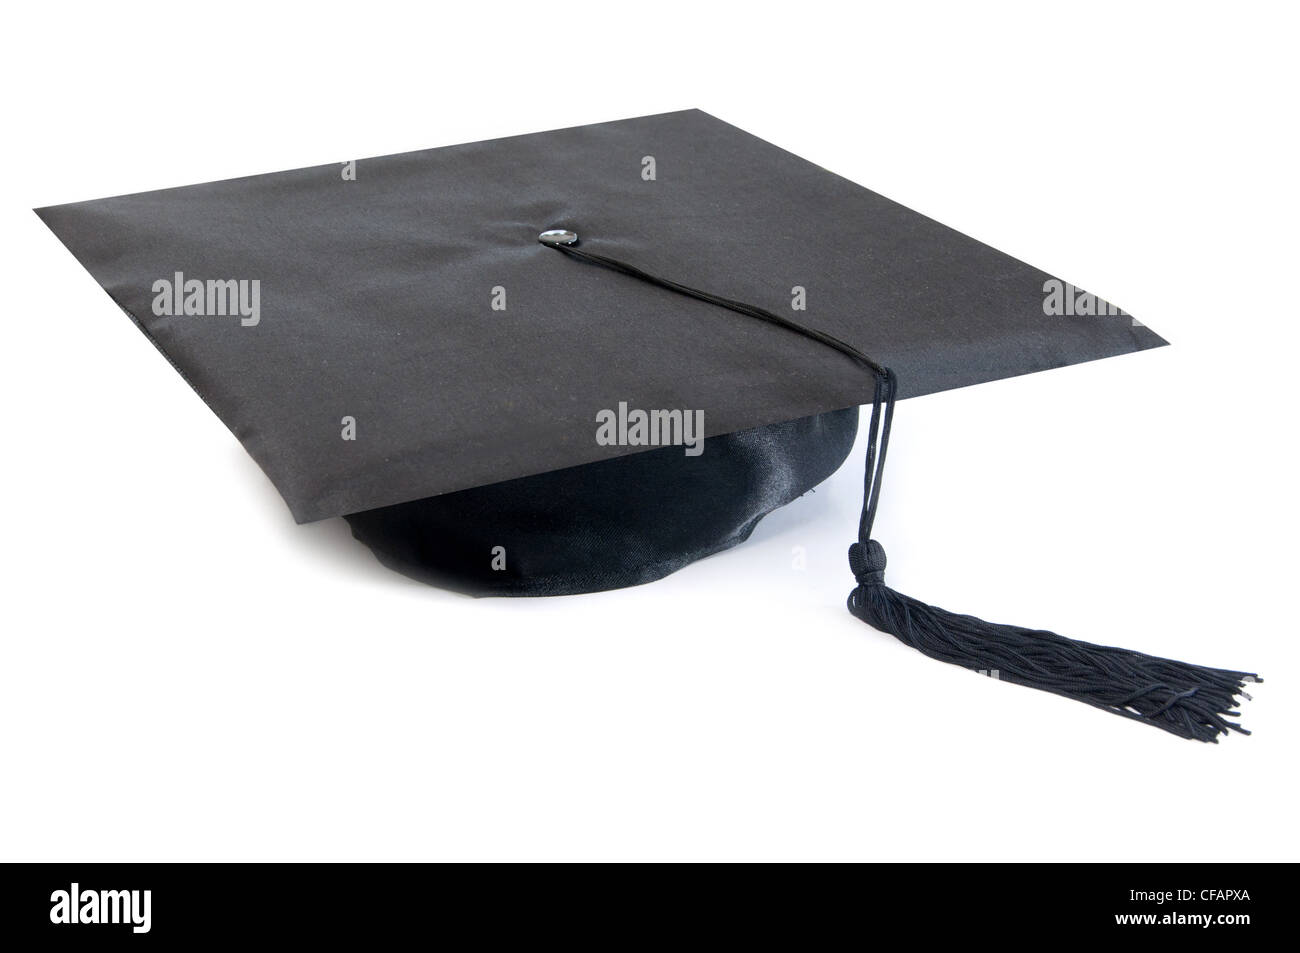 92,400+ Graduation Hat Stock Photos, Pictures & Royalty-Free